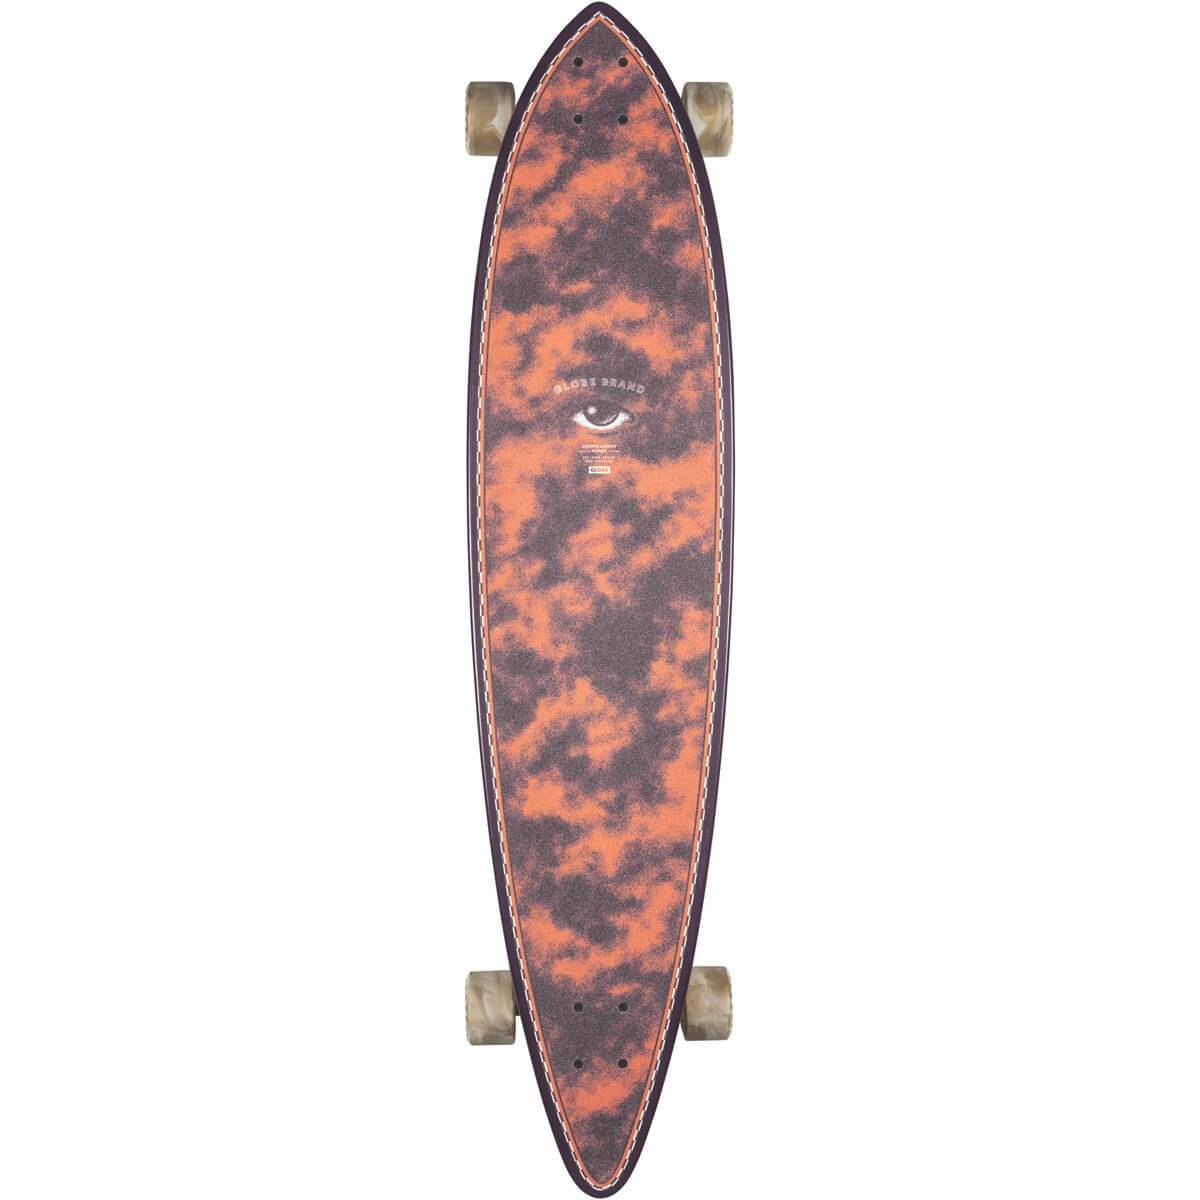 Globe Pintail longboard 44" The Outpost